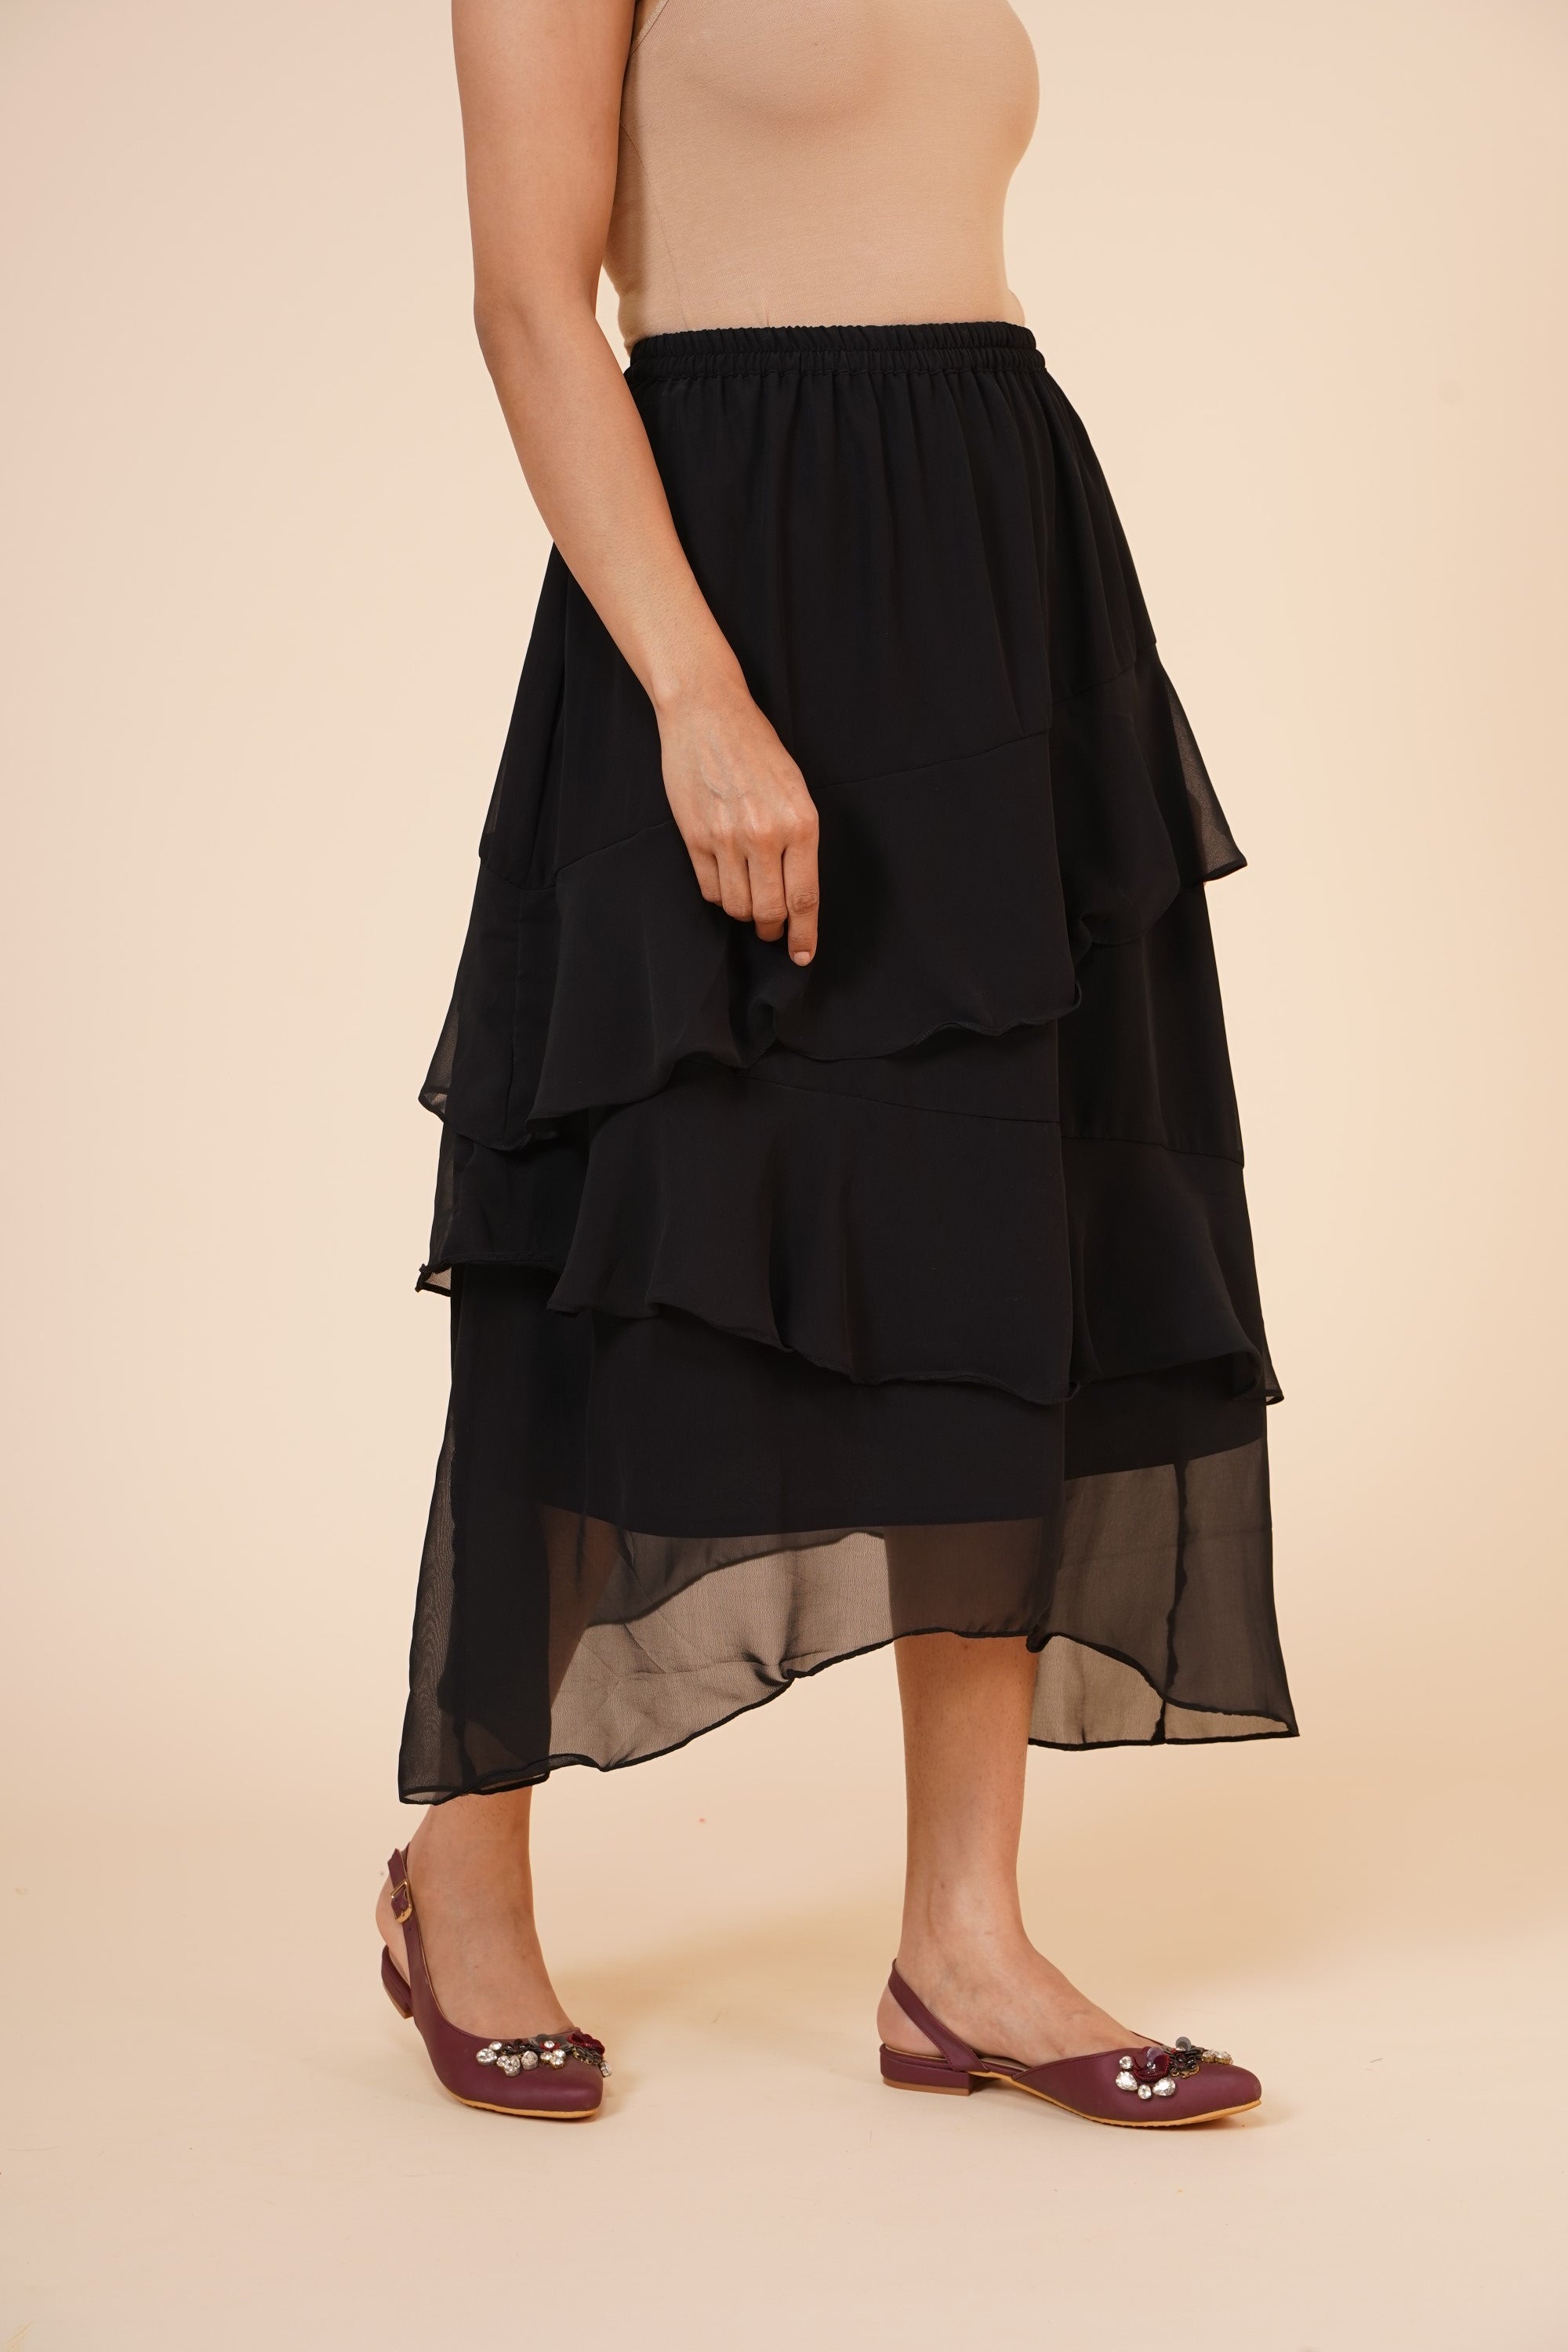 Women's Chiffon Ruffle Skirt With Elastic In Black  - MIRACOLOS by Ruchi